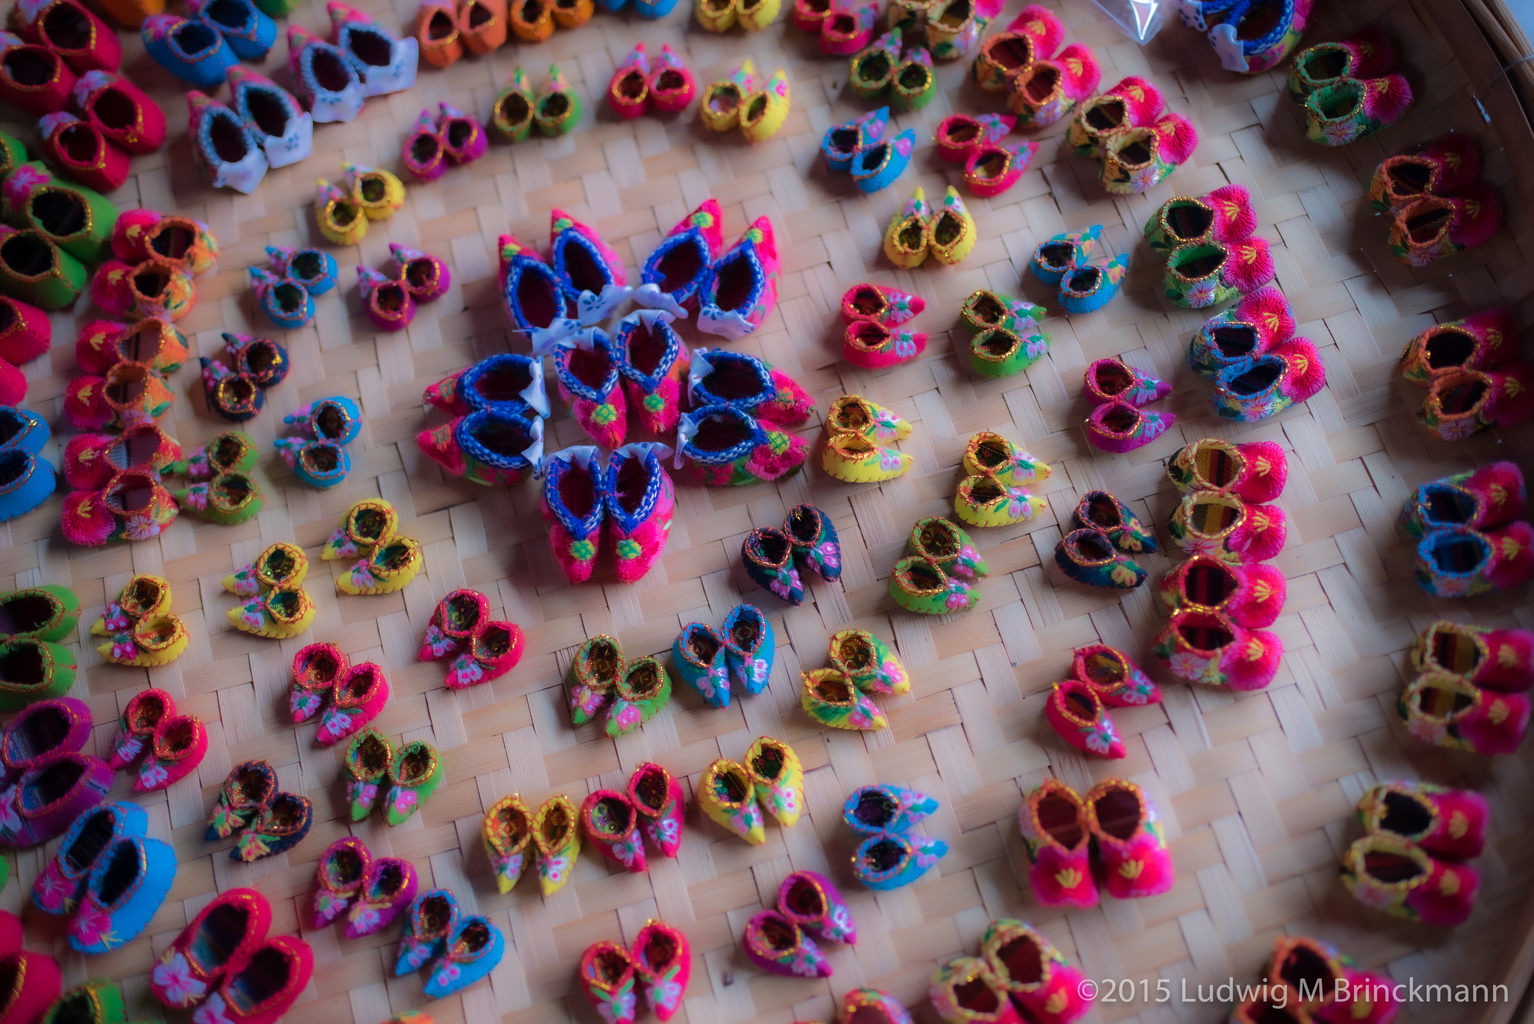 Picture: Cloth-made tiny shoes made as souvenirs in Xizhou.